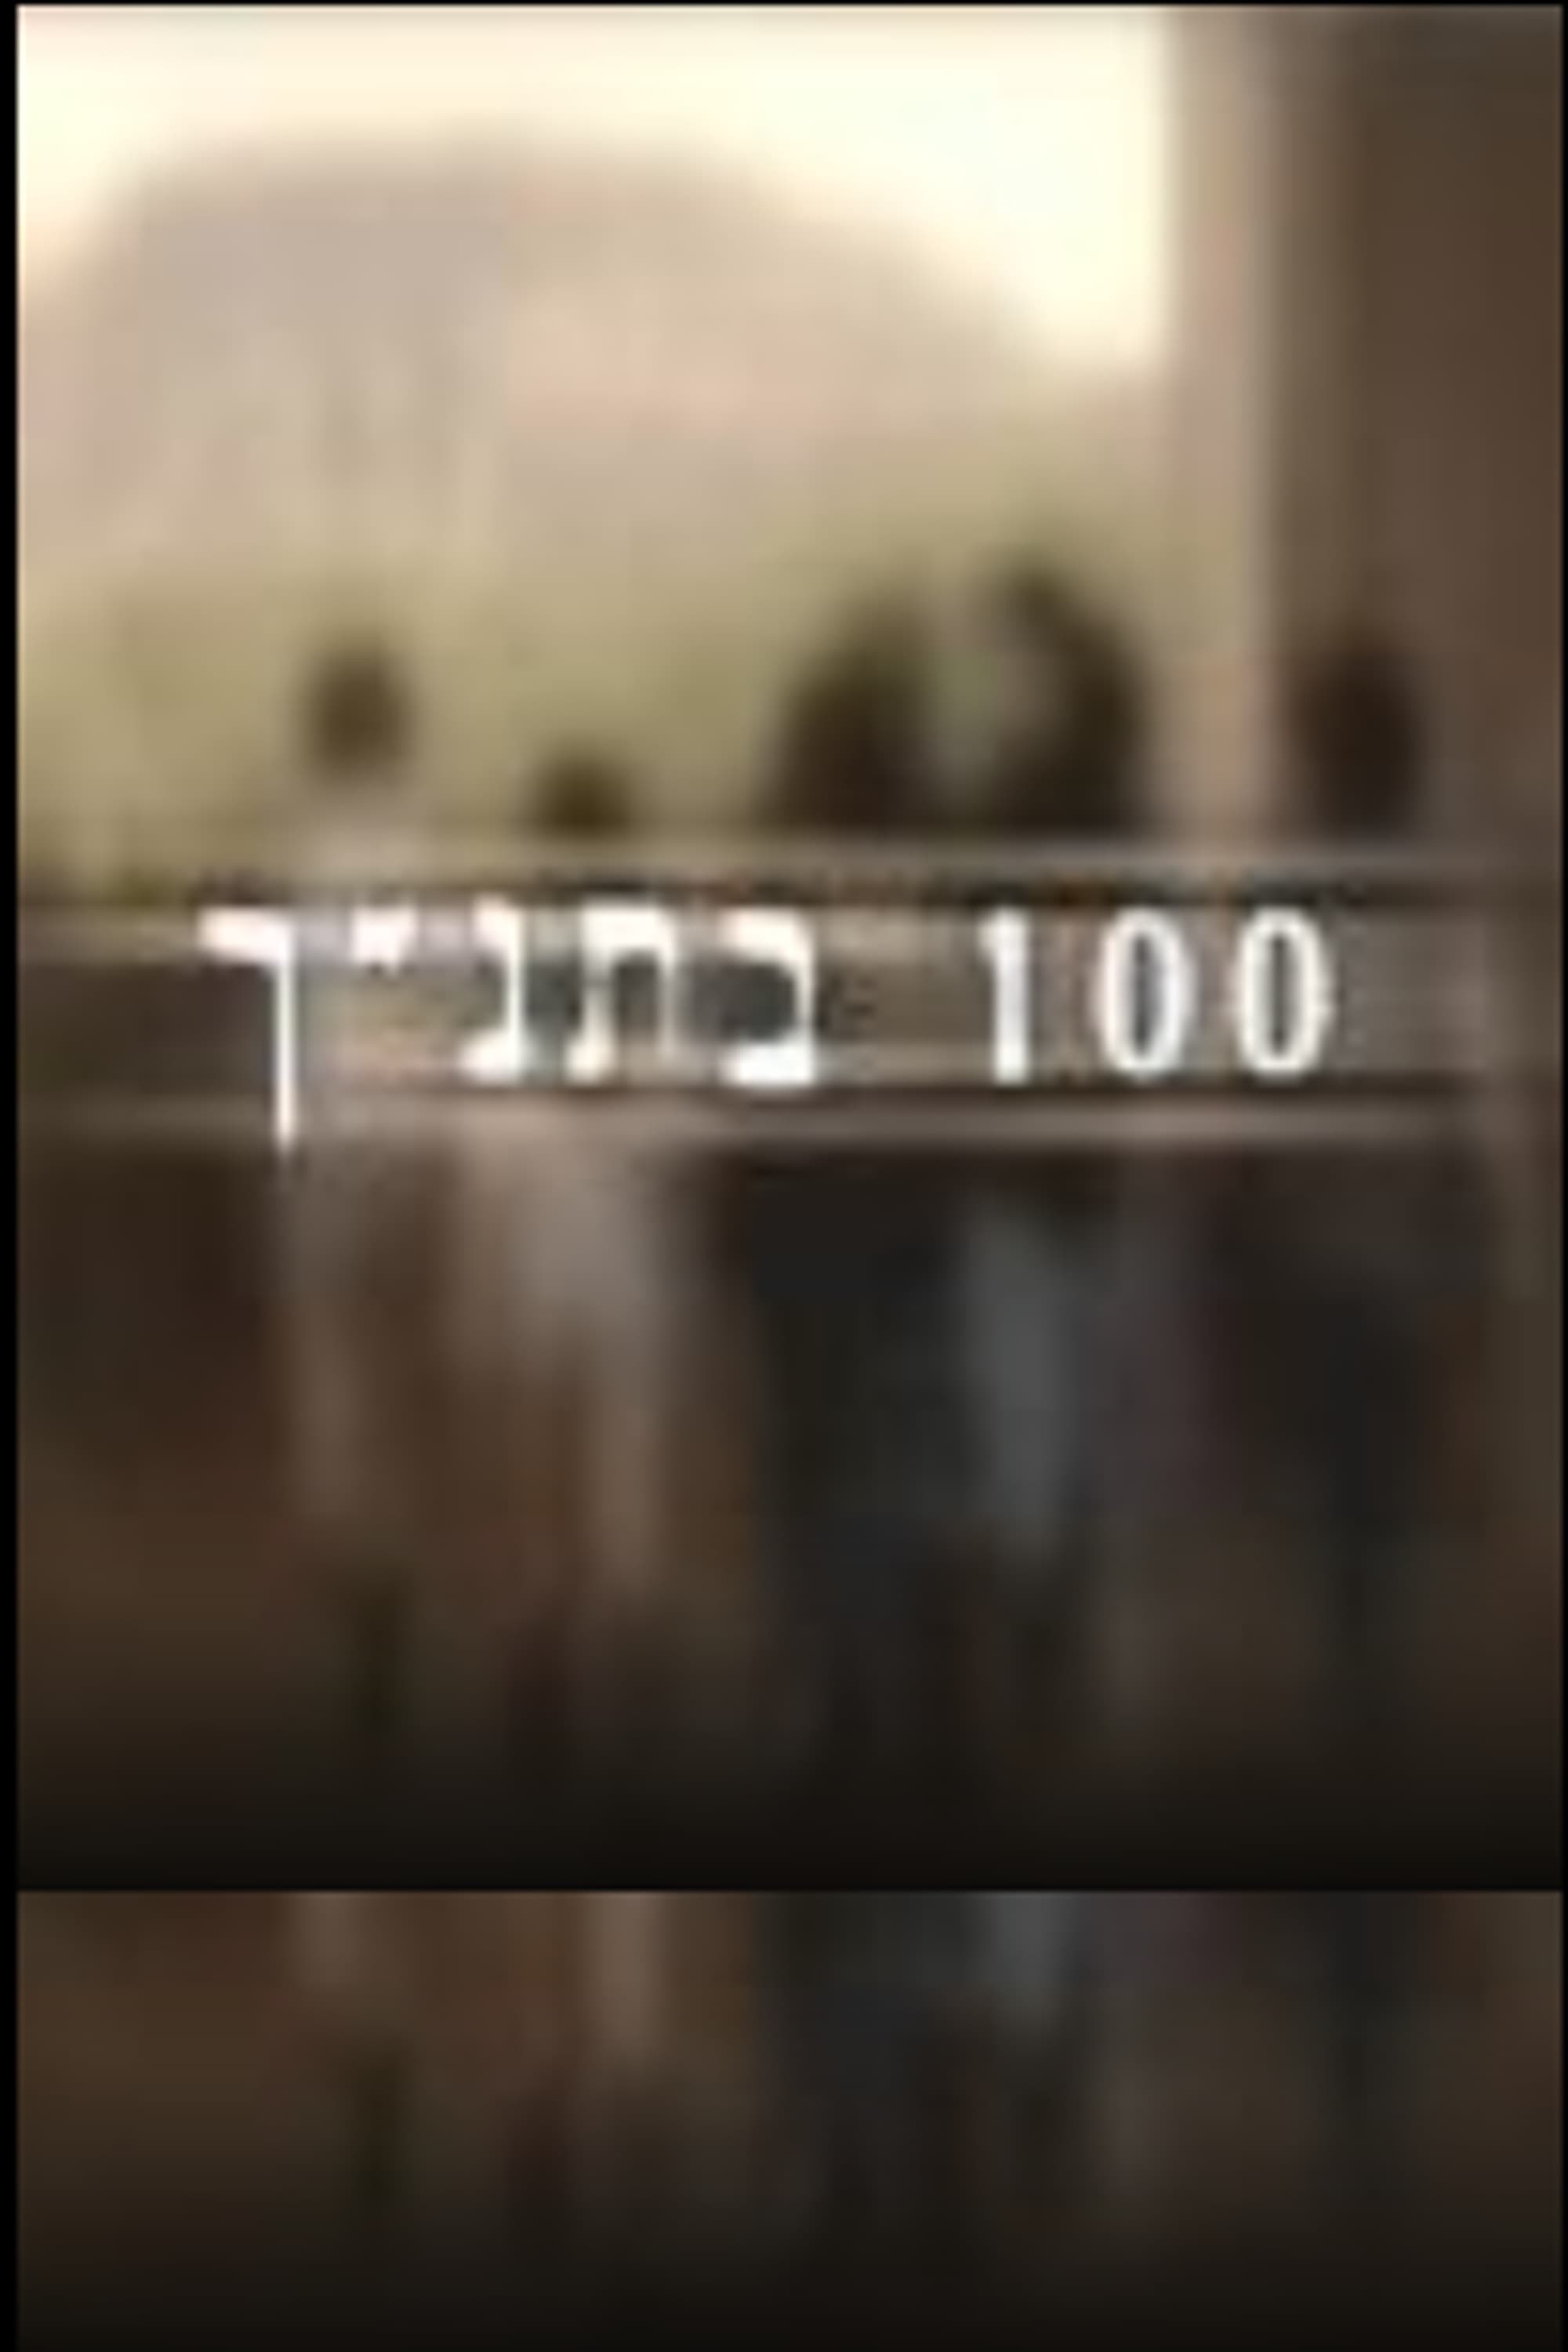 100 in Bible